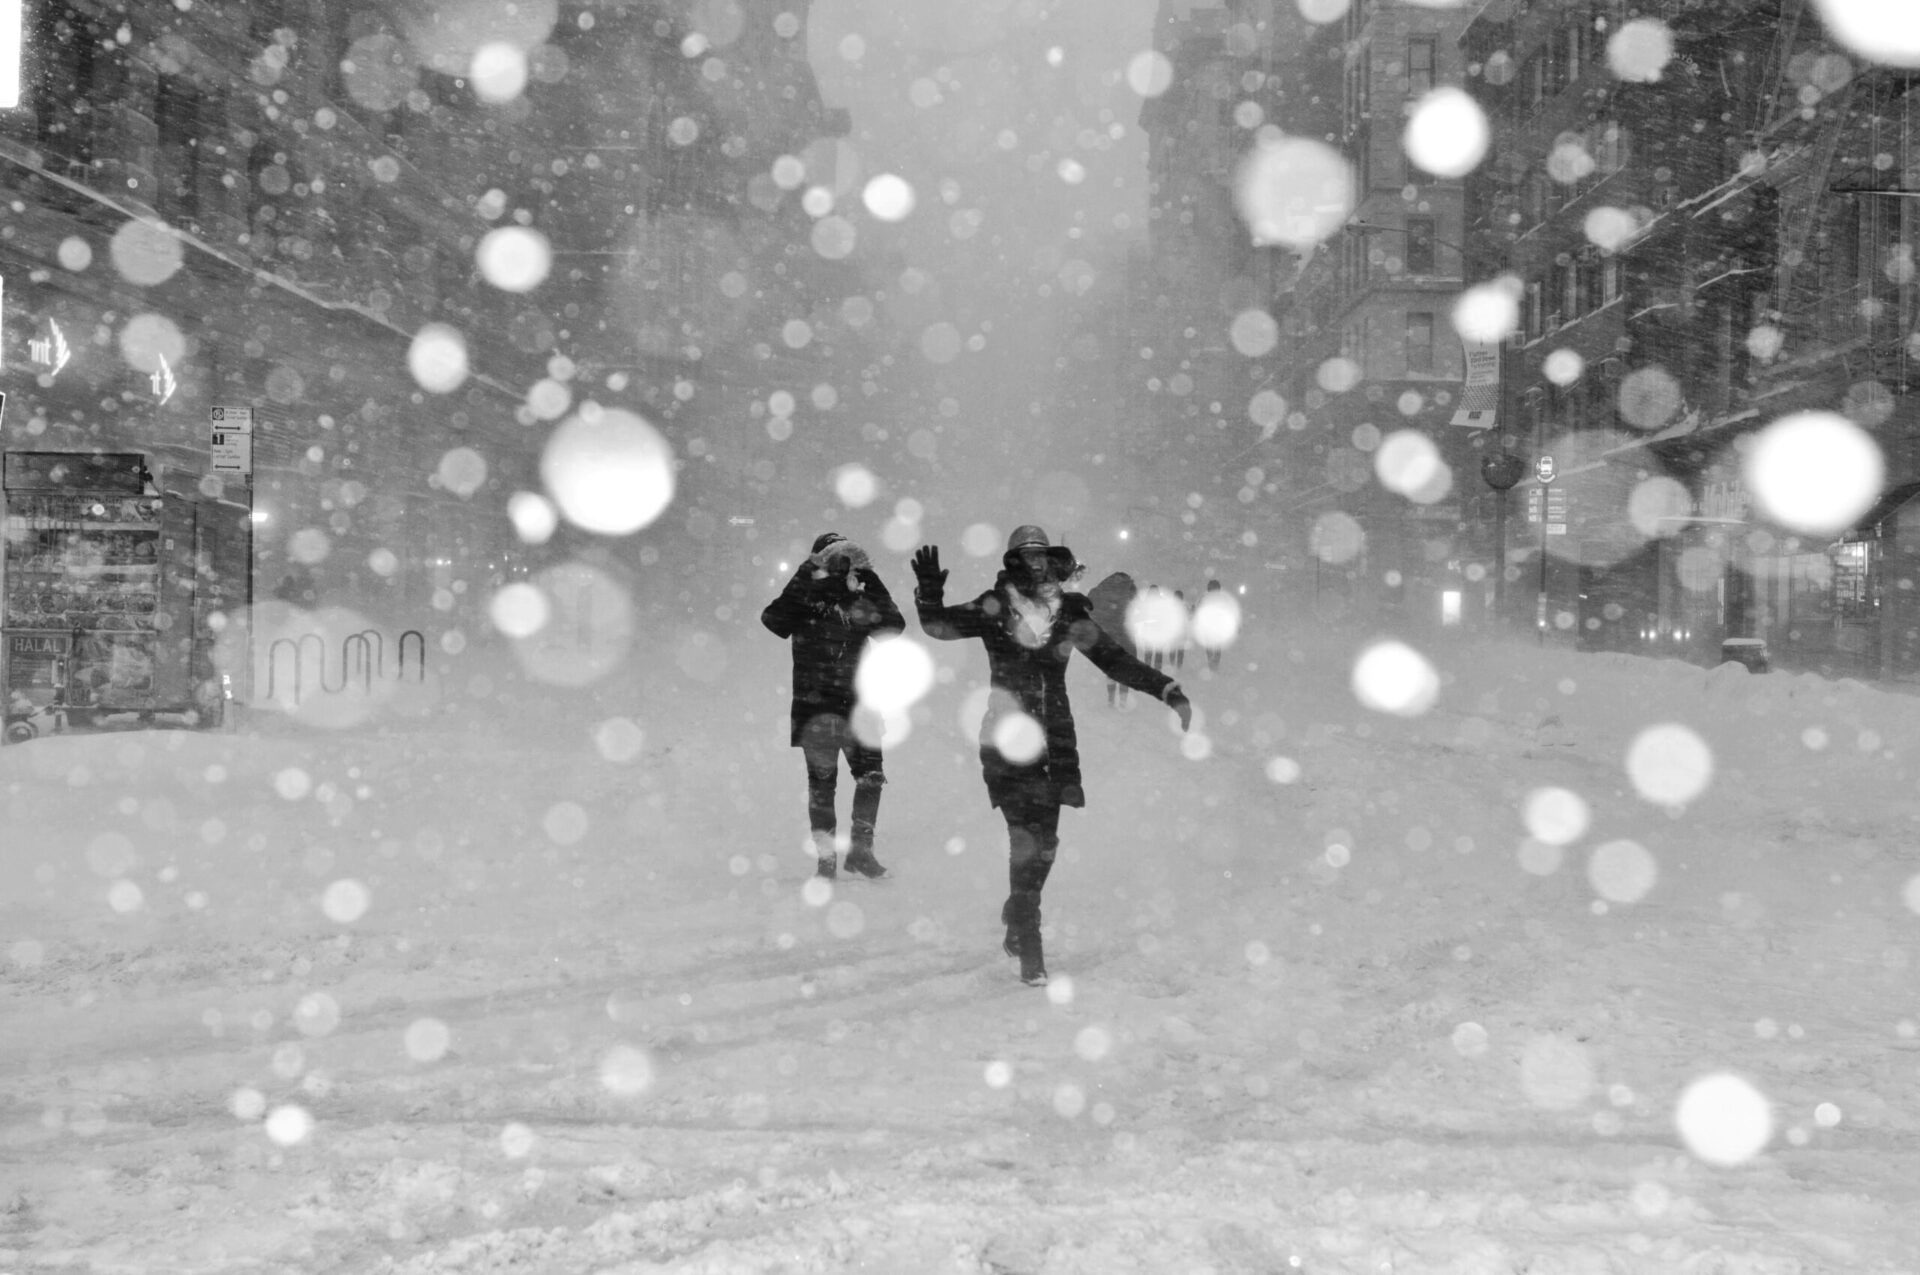 People smiling while walking in the snow